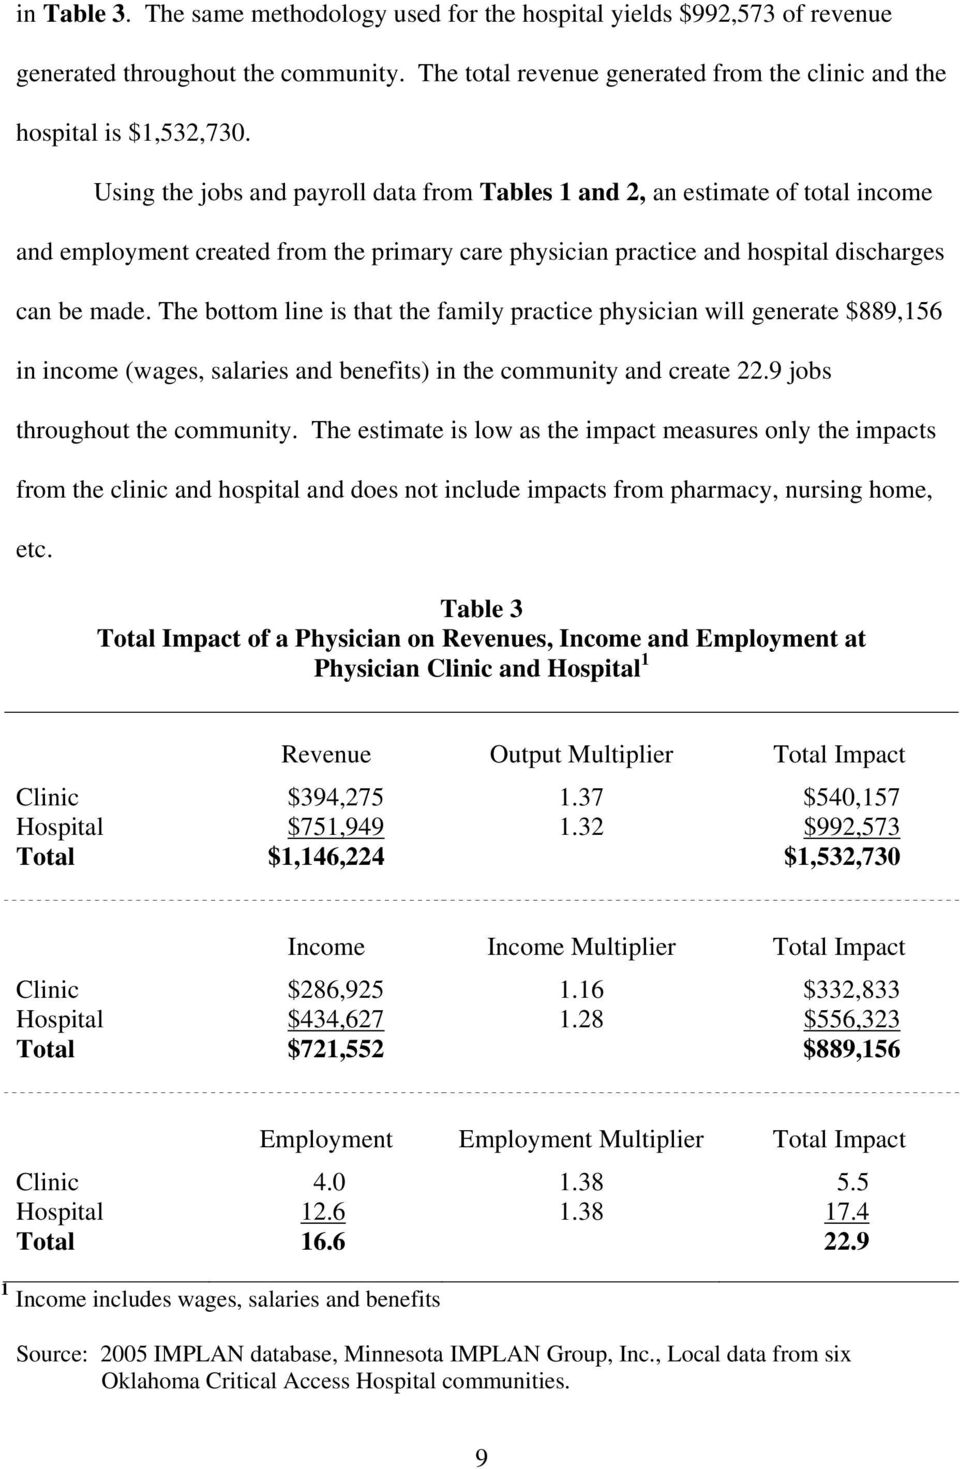 The bottom line is that the family practice physician will generate $889,156 in income (wages, salaries and benefits) in the community and create 22.9 jobs throughout the community.